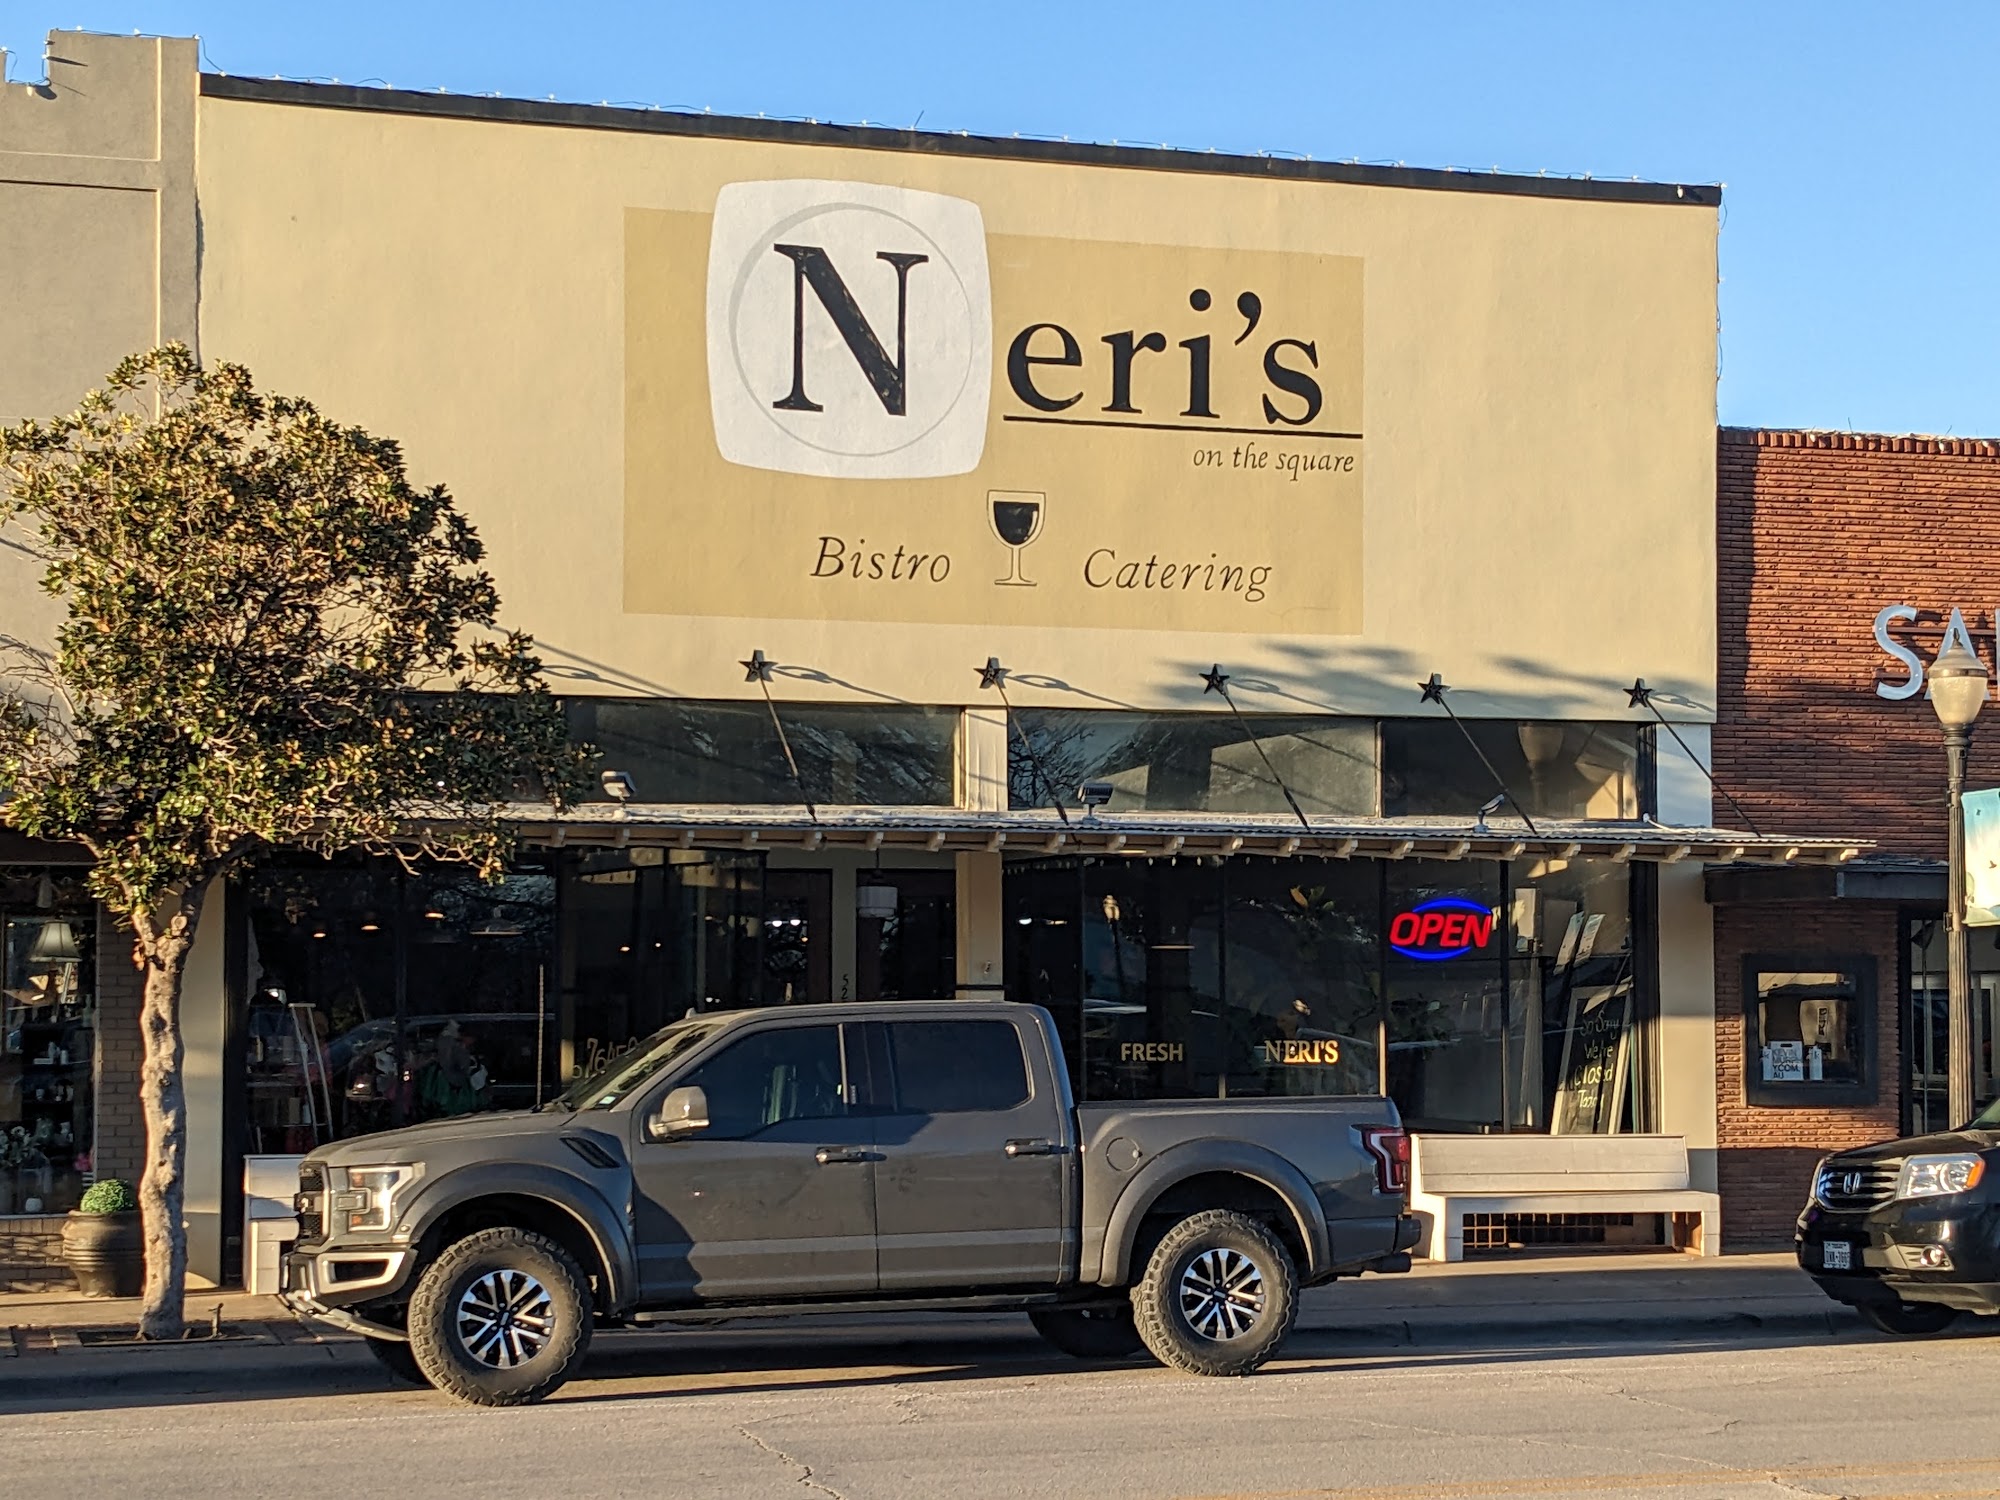 Neri's on the Square